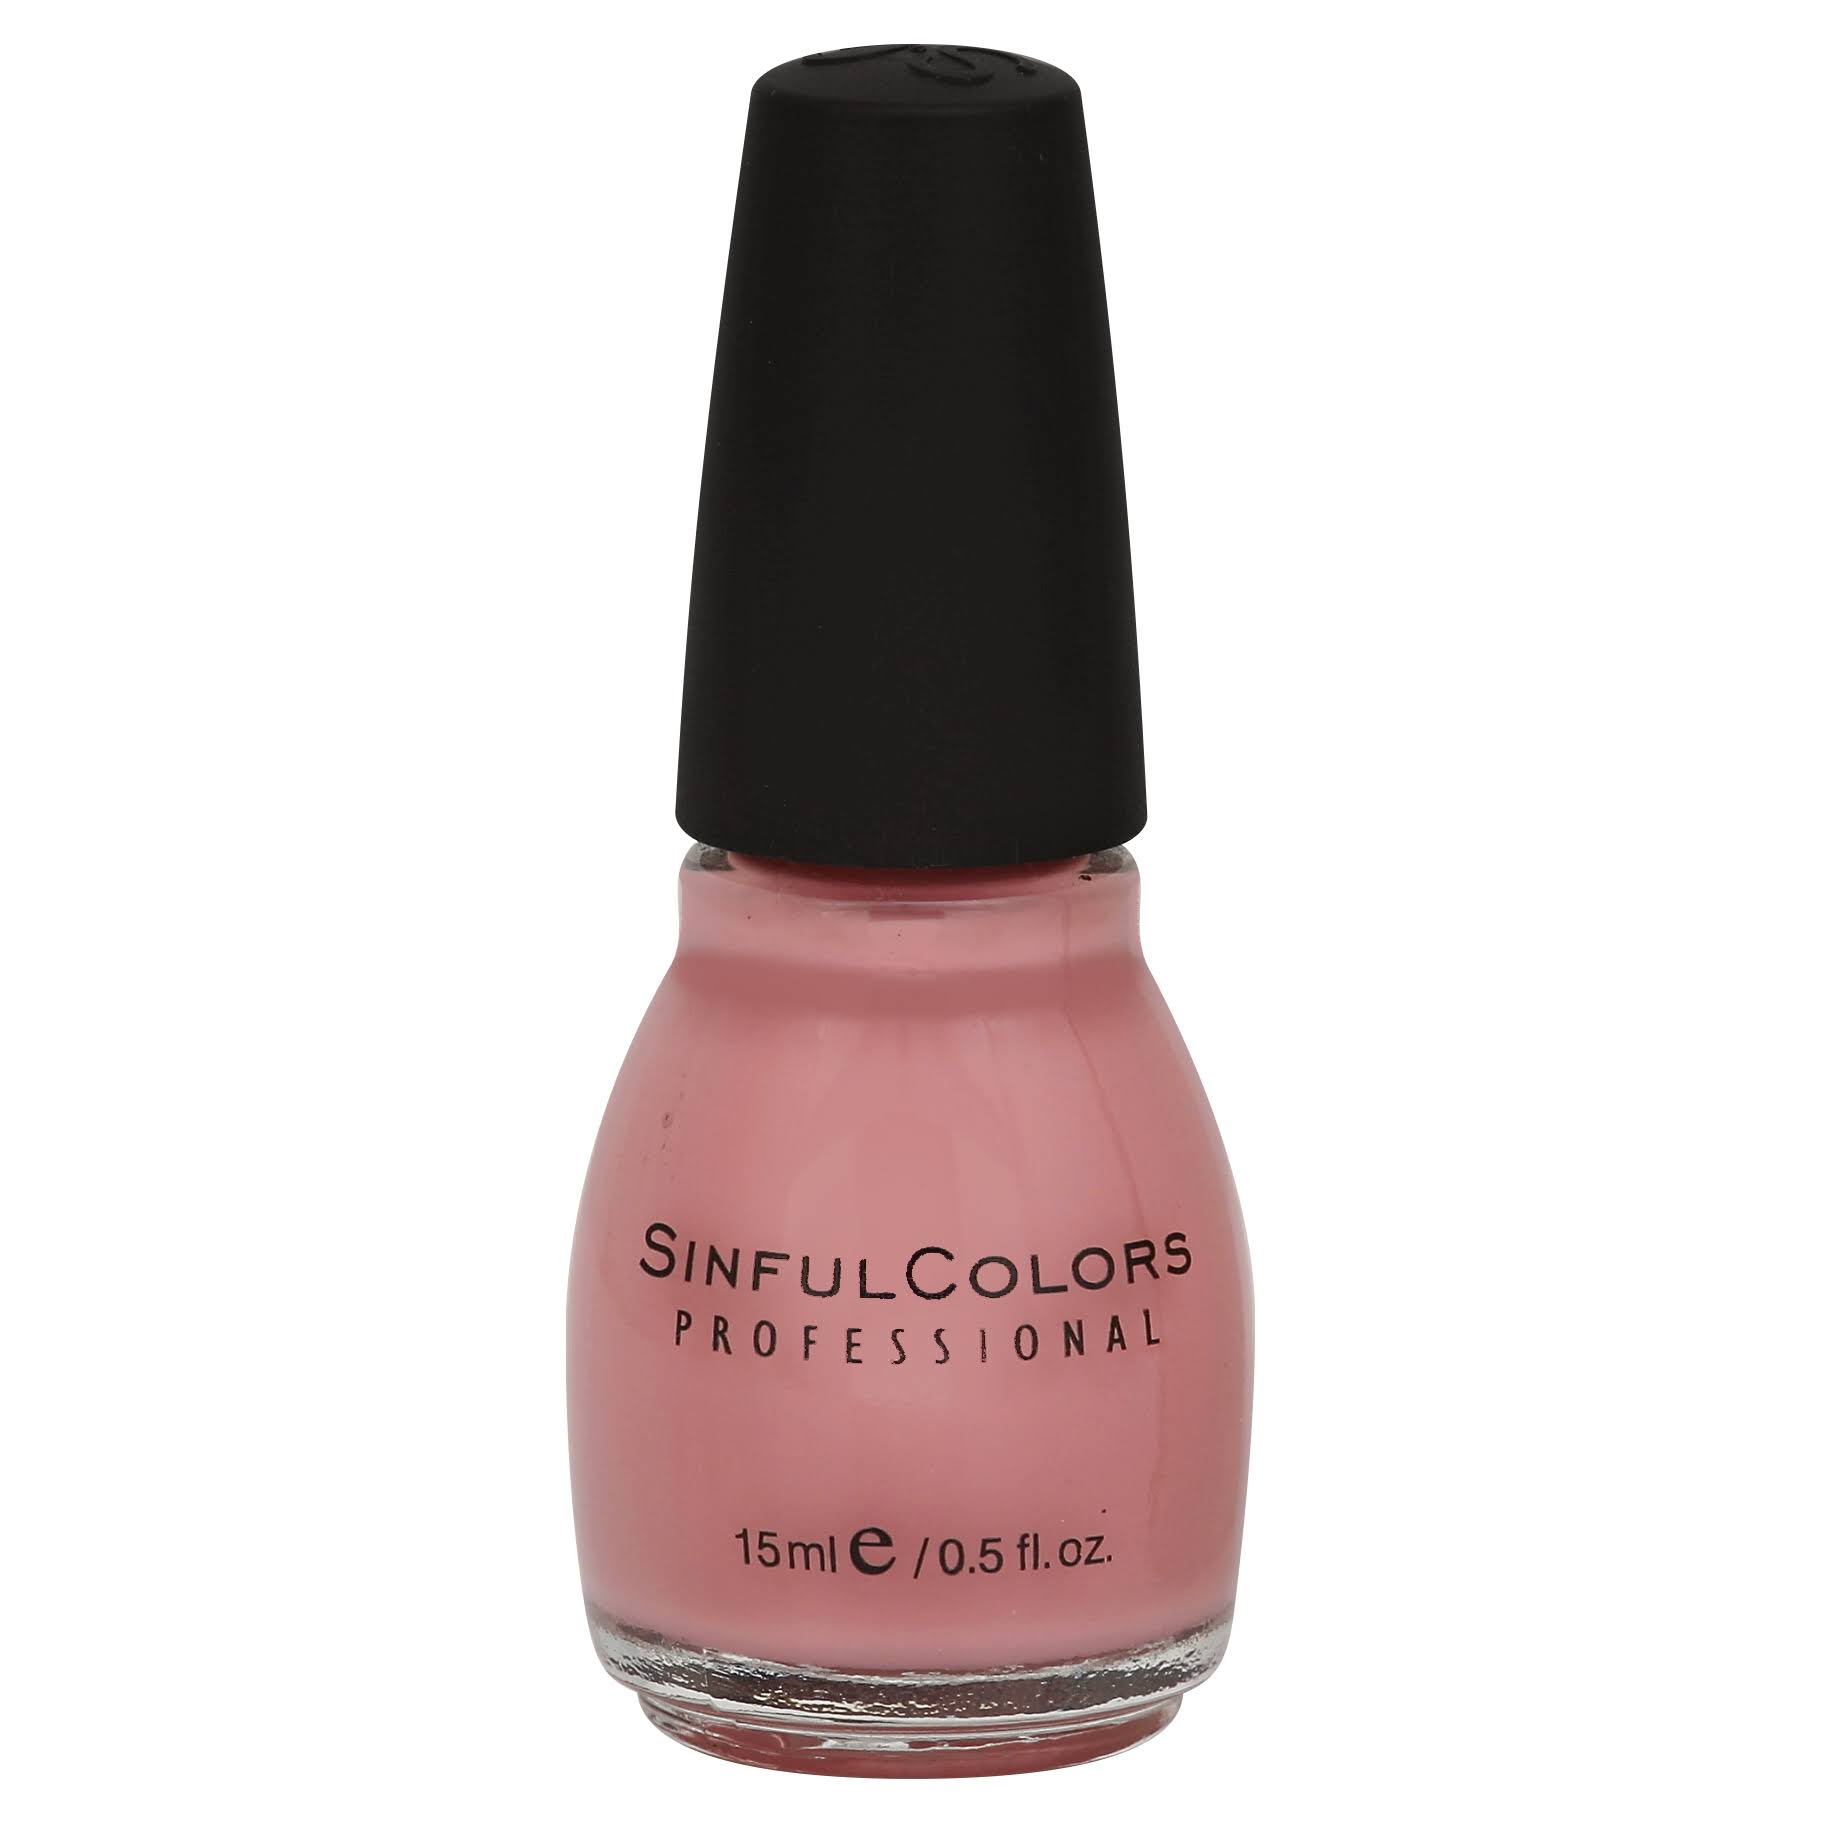 Sinful Colors Professional Nail Color - 5164 Starfish, 0.5oz